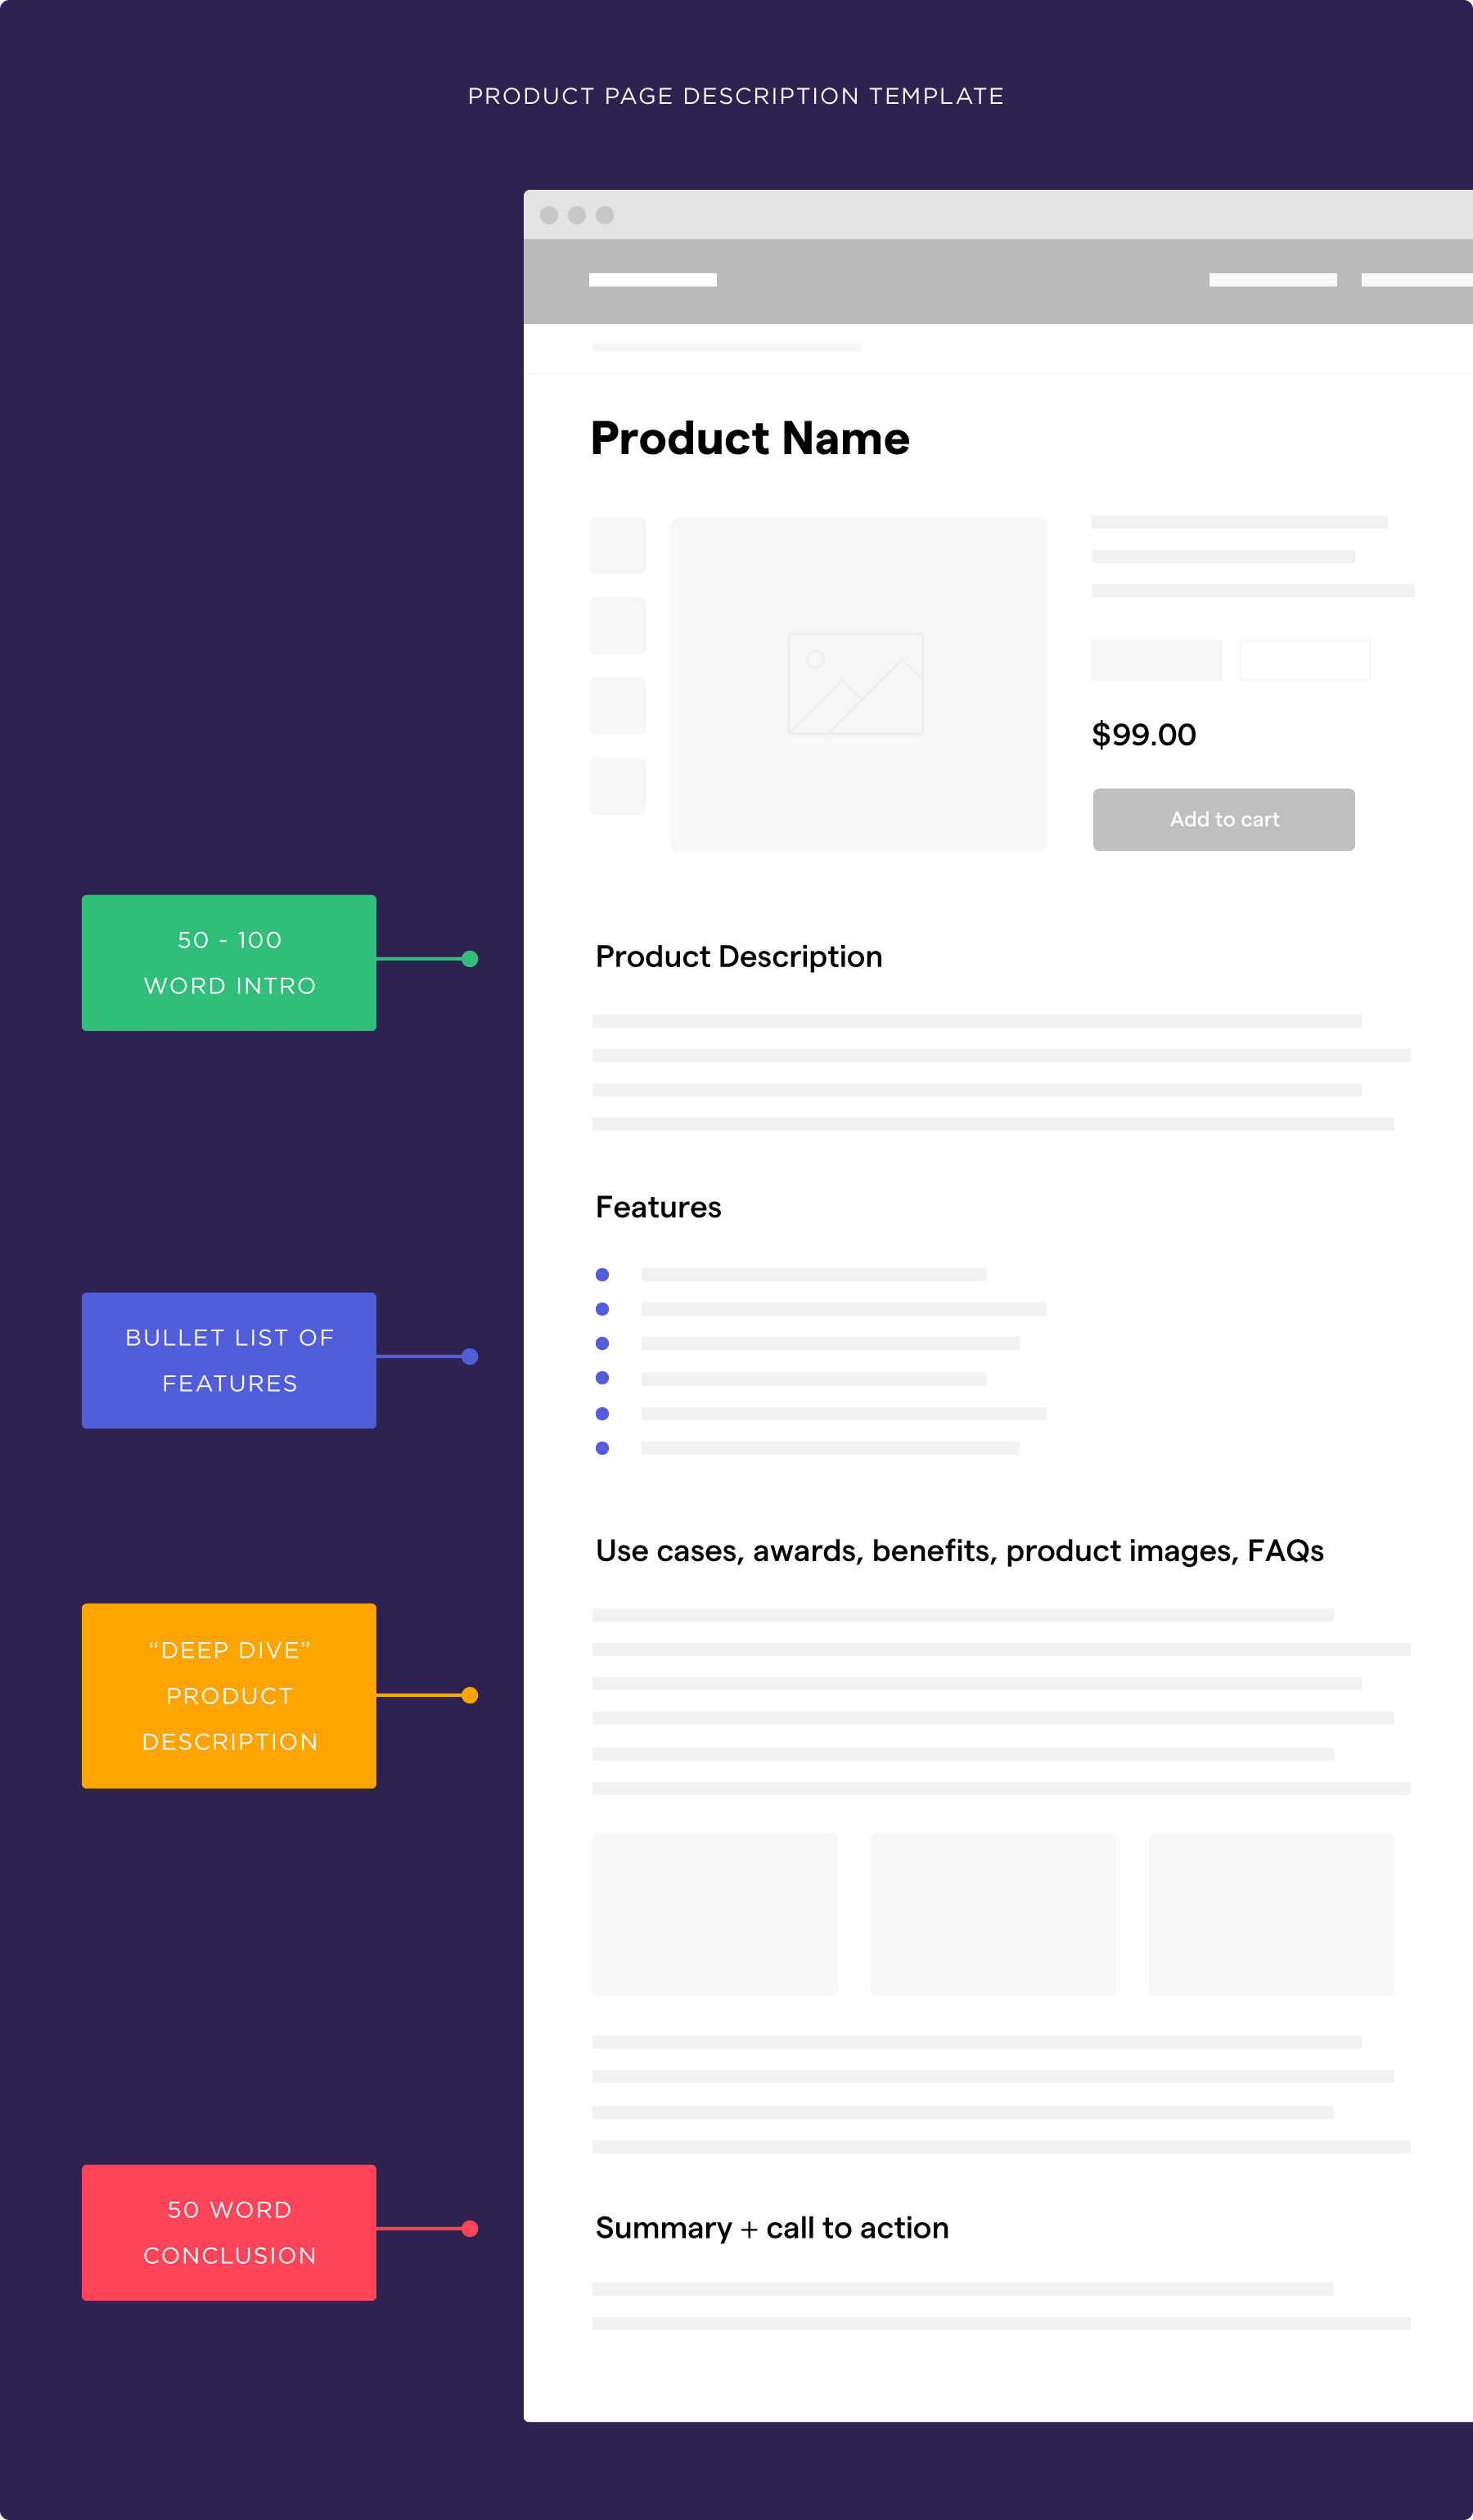 Example template for a product page description